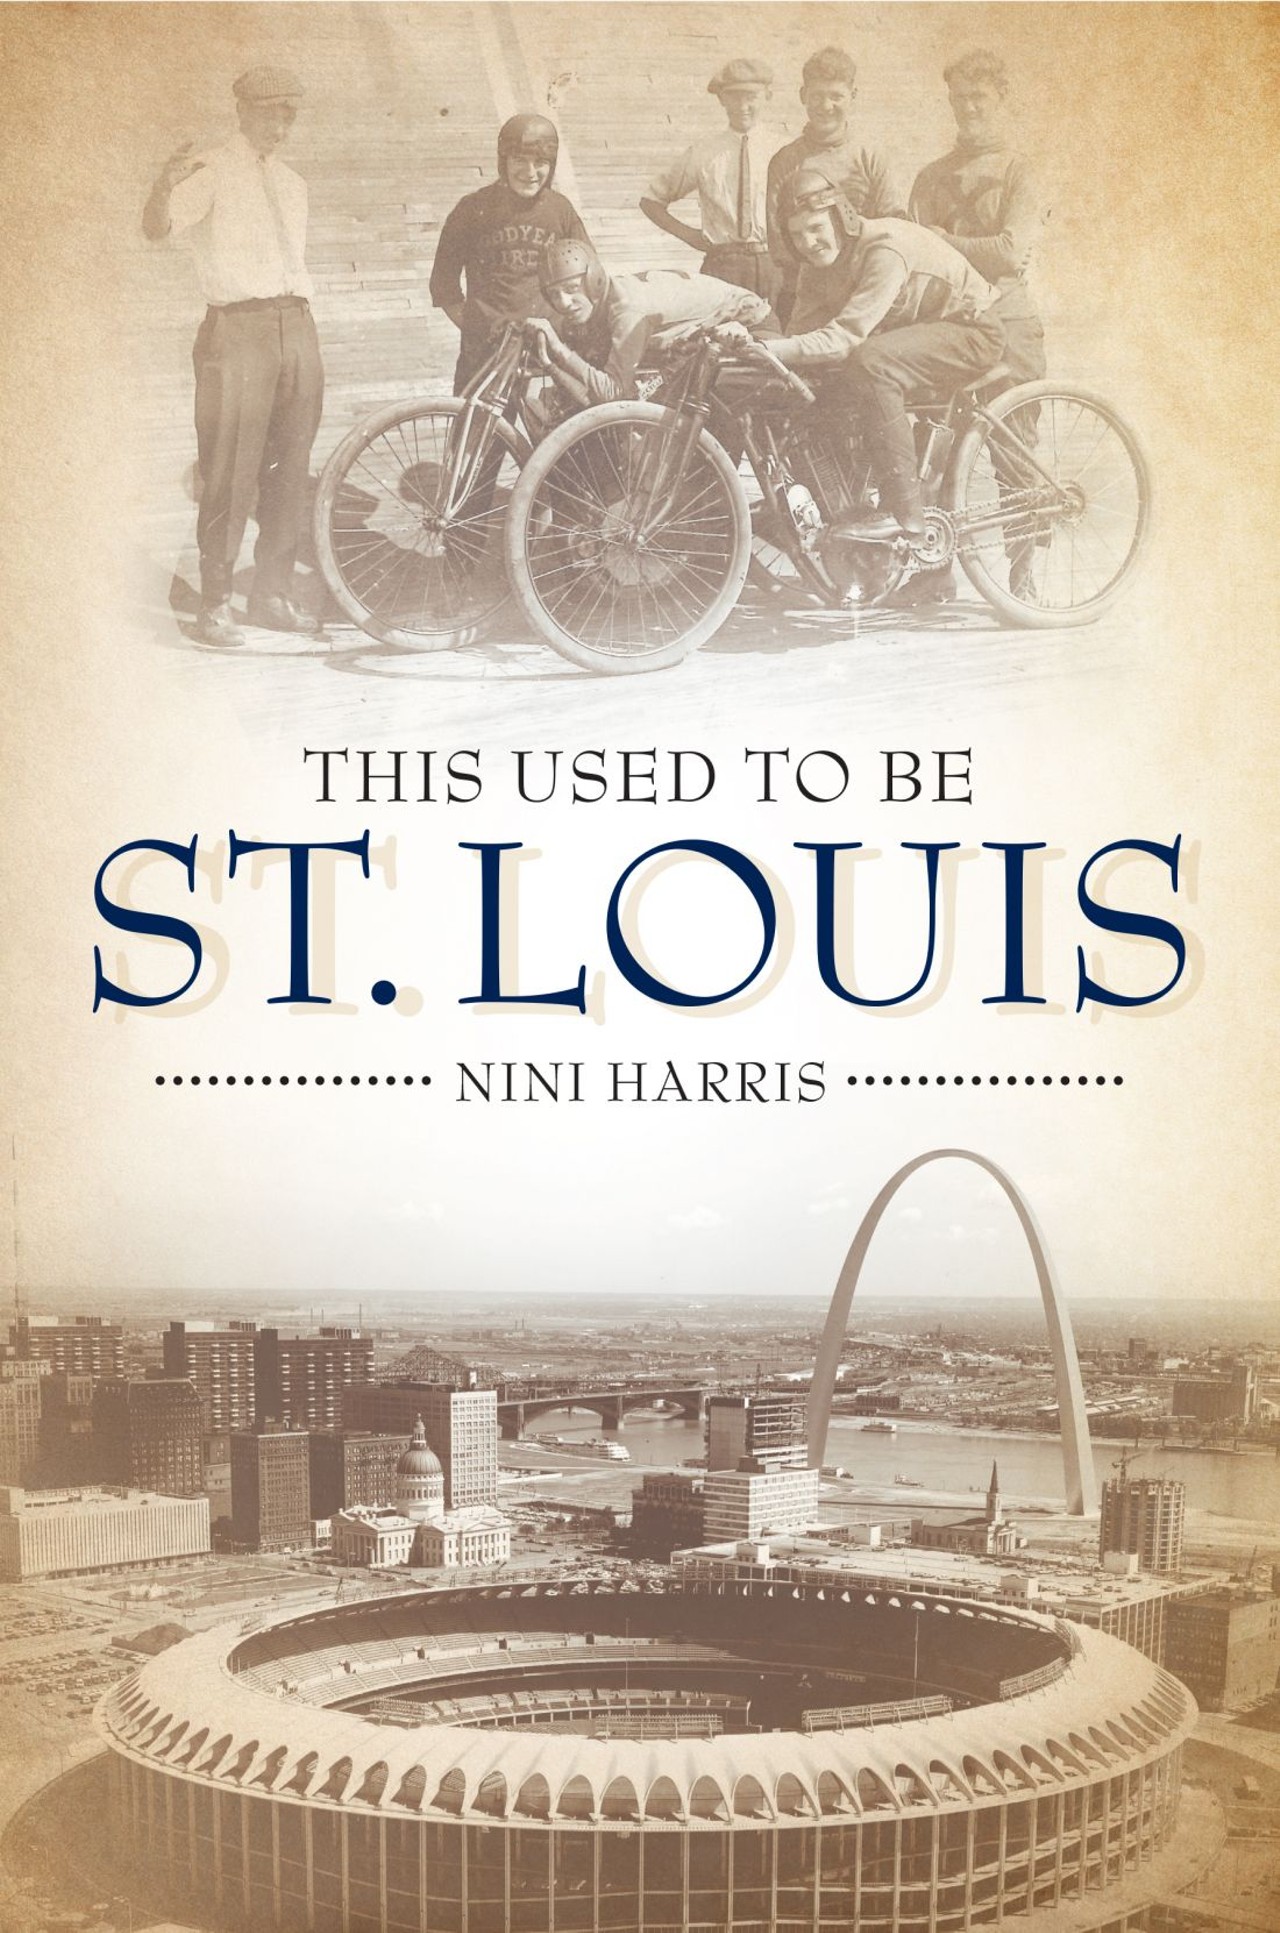 This Used to Be St. Louis book cover.
Image courtesy of Reedy Press.